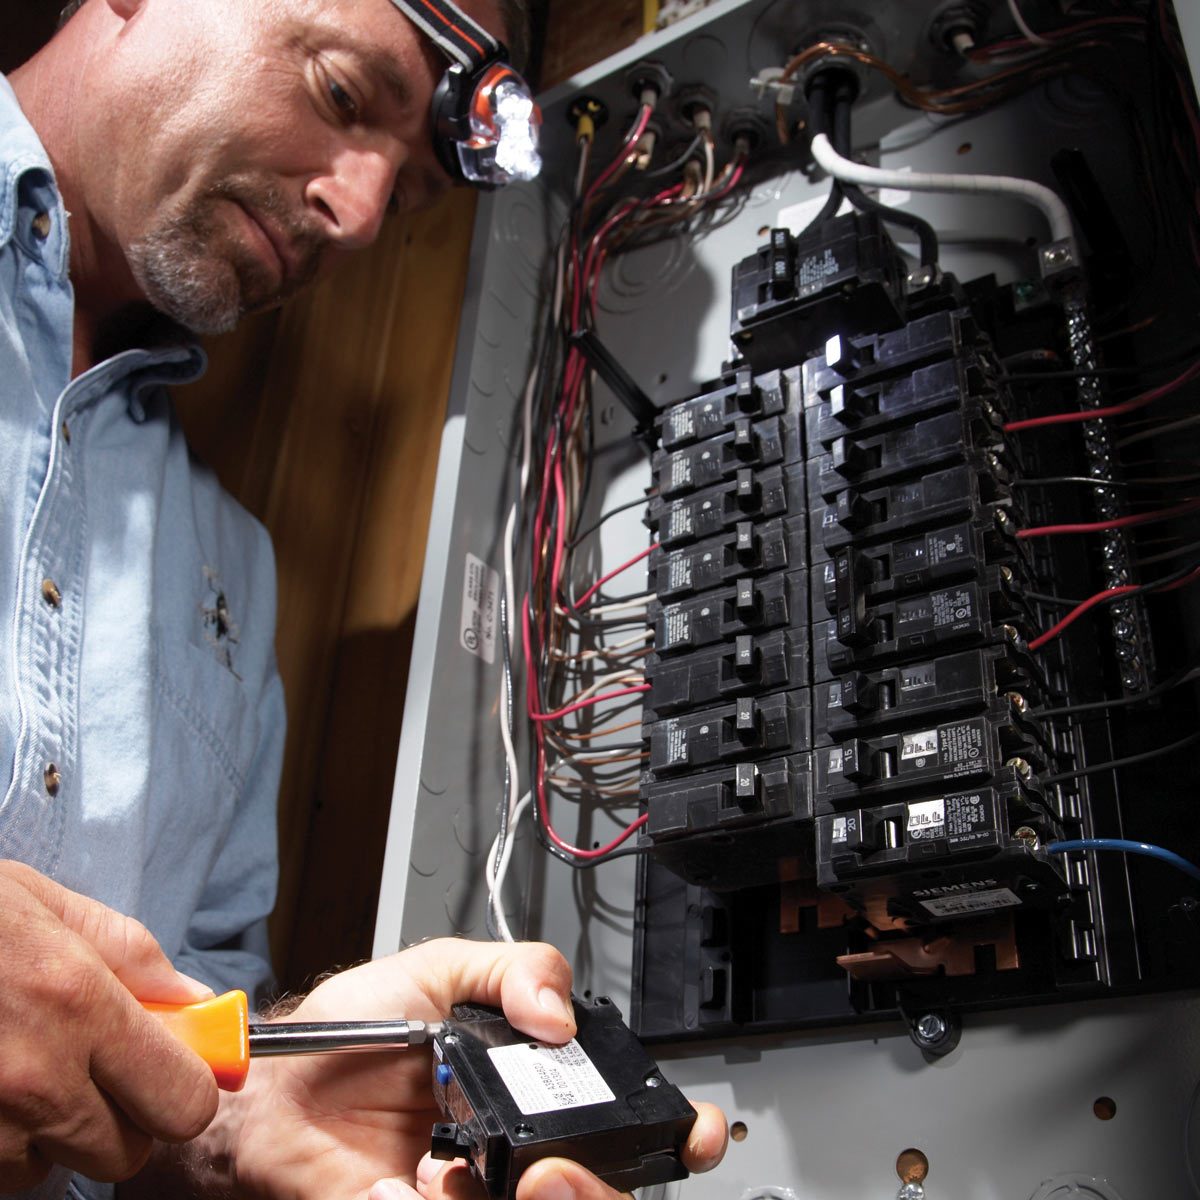 breaker-box-safety-how-to-connect-a-new-circuit-diy-family-handyman